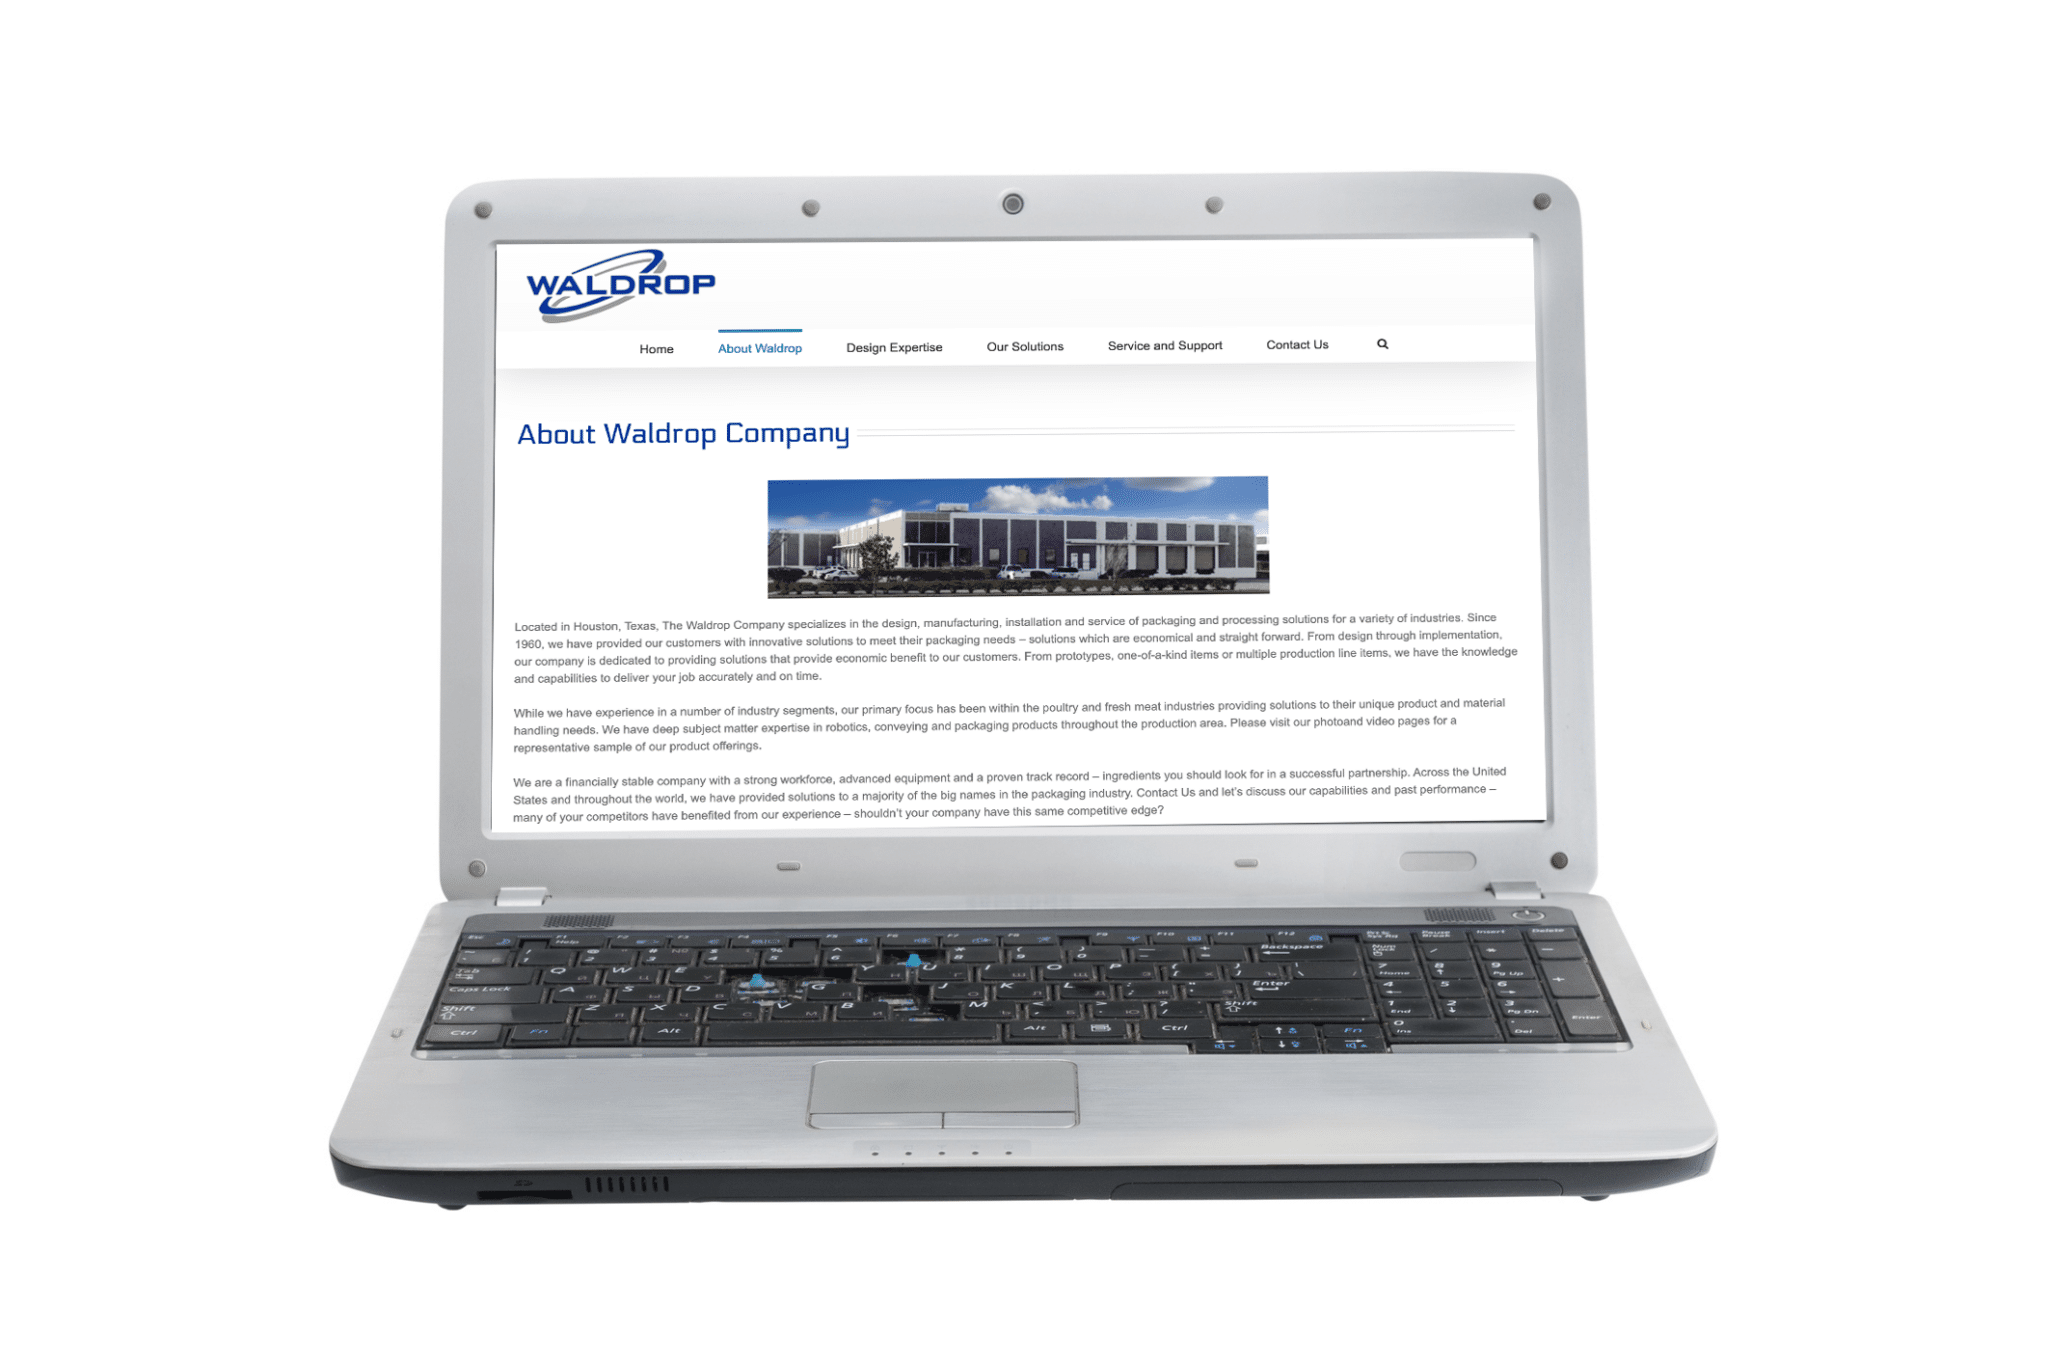 Open laptop with the About Waldrop Company webpage visible.